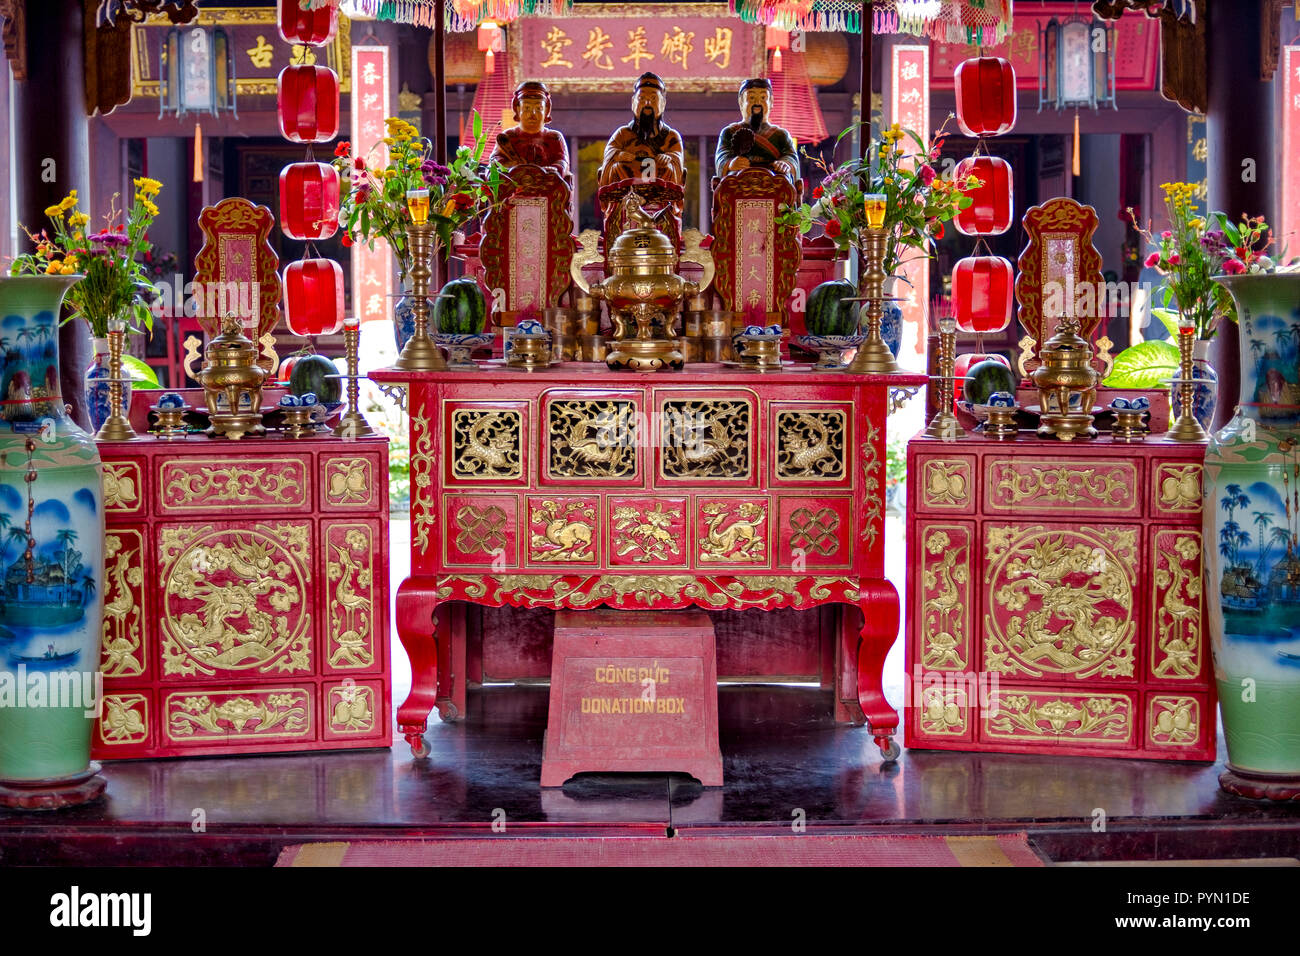 Shrine in the Quan Cong Temple, Hoi An Vietnam Stock Photo